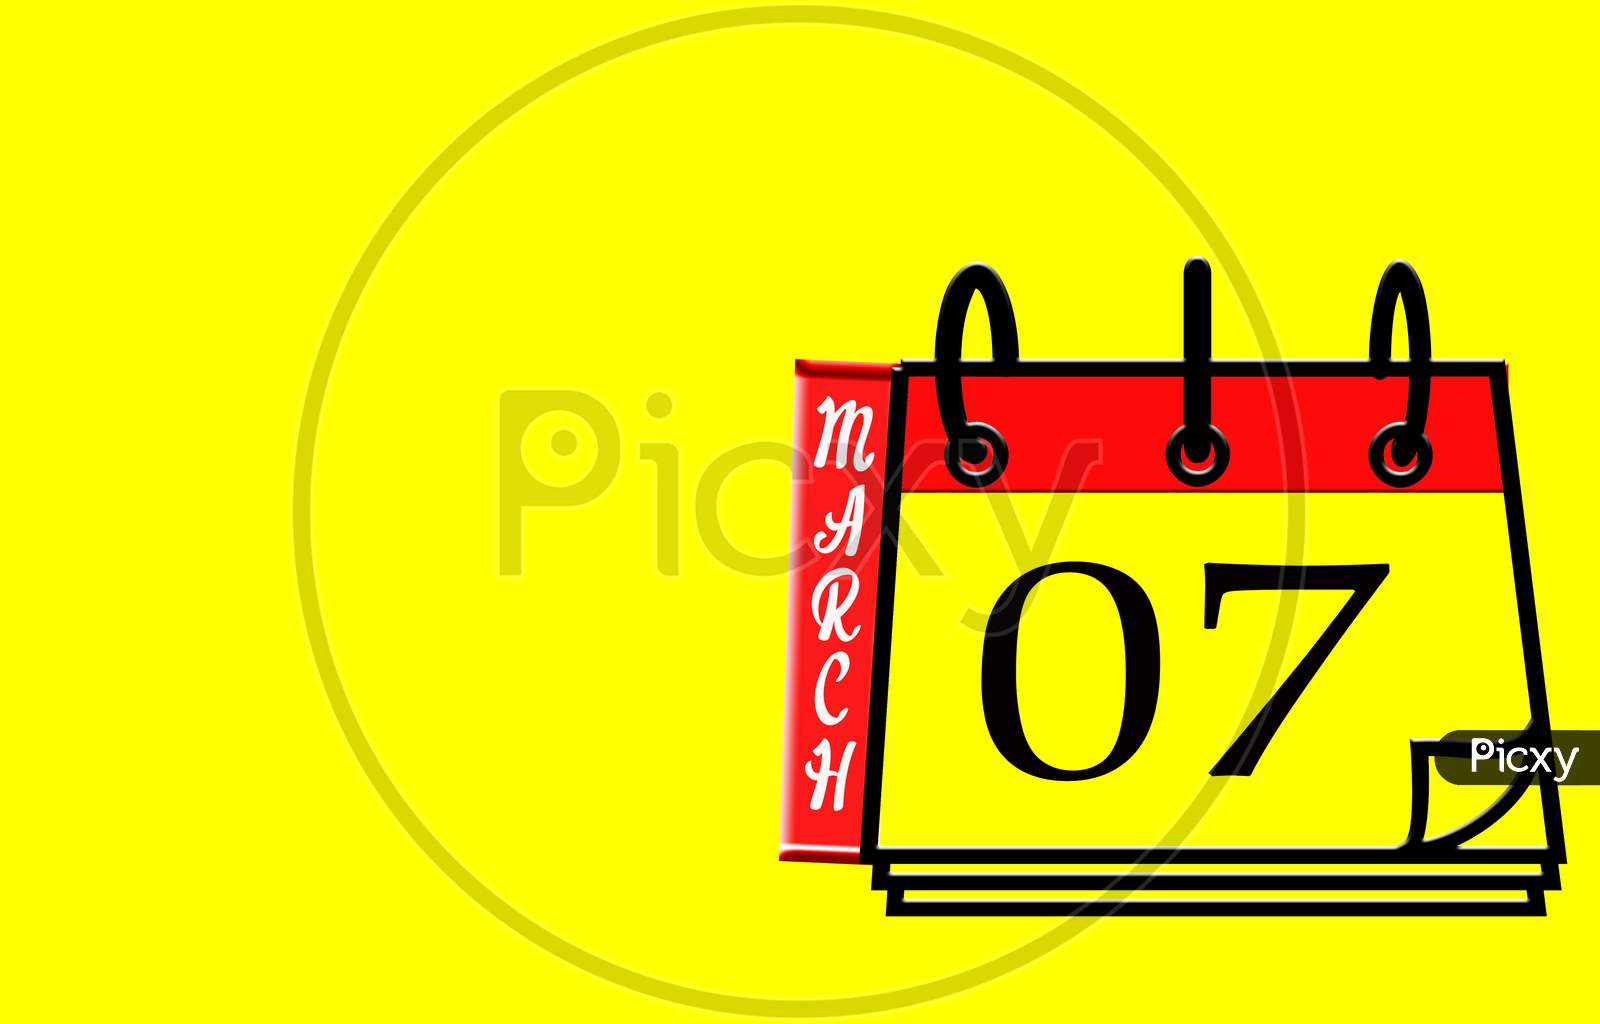 March 07, Calendar On Yellow Background